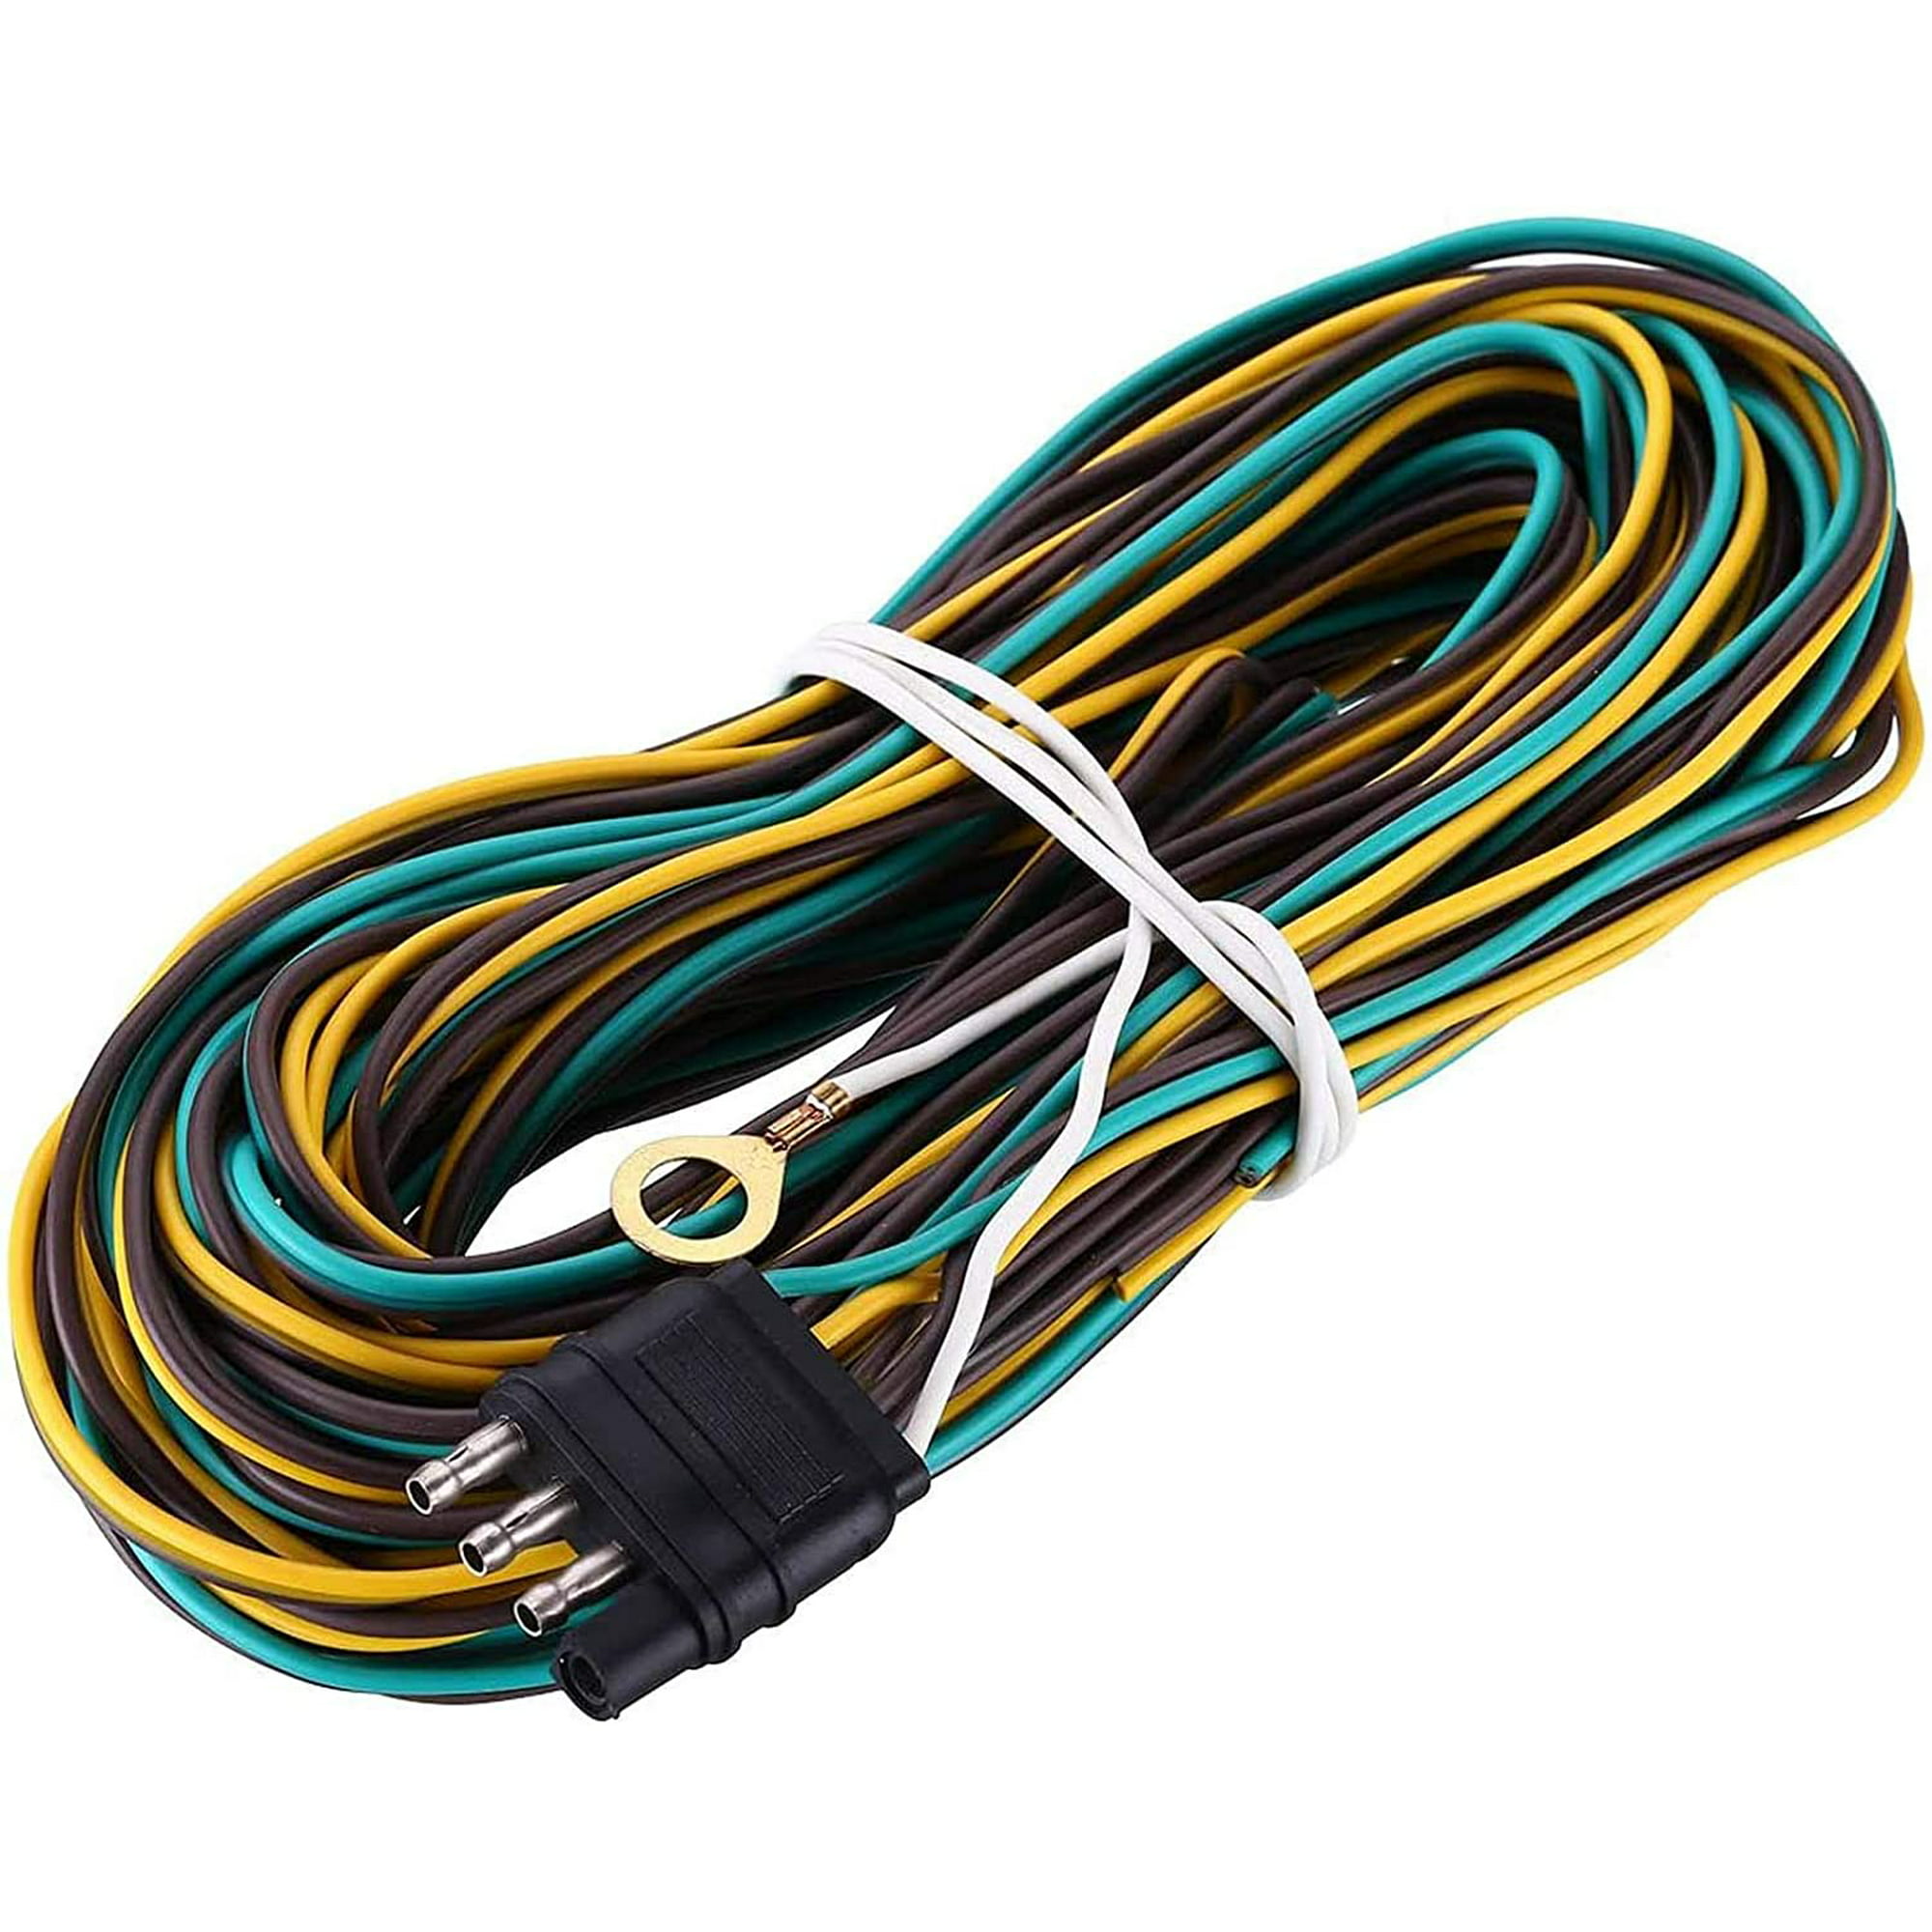 Iyefeng 25ft Trailer Wiring Harness